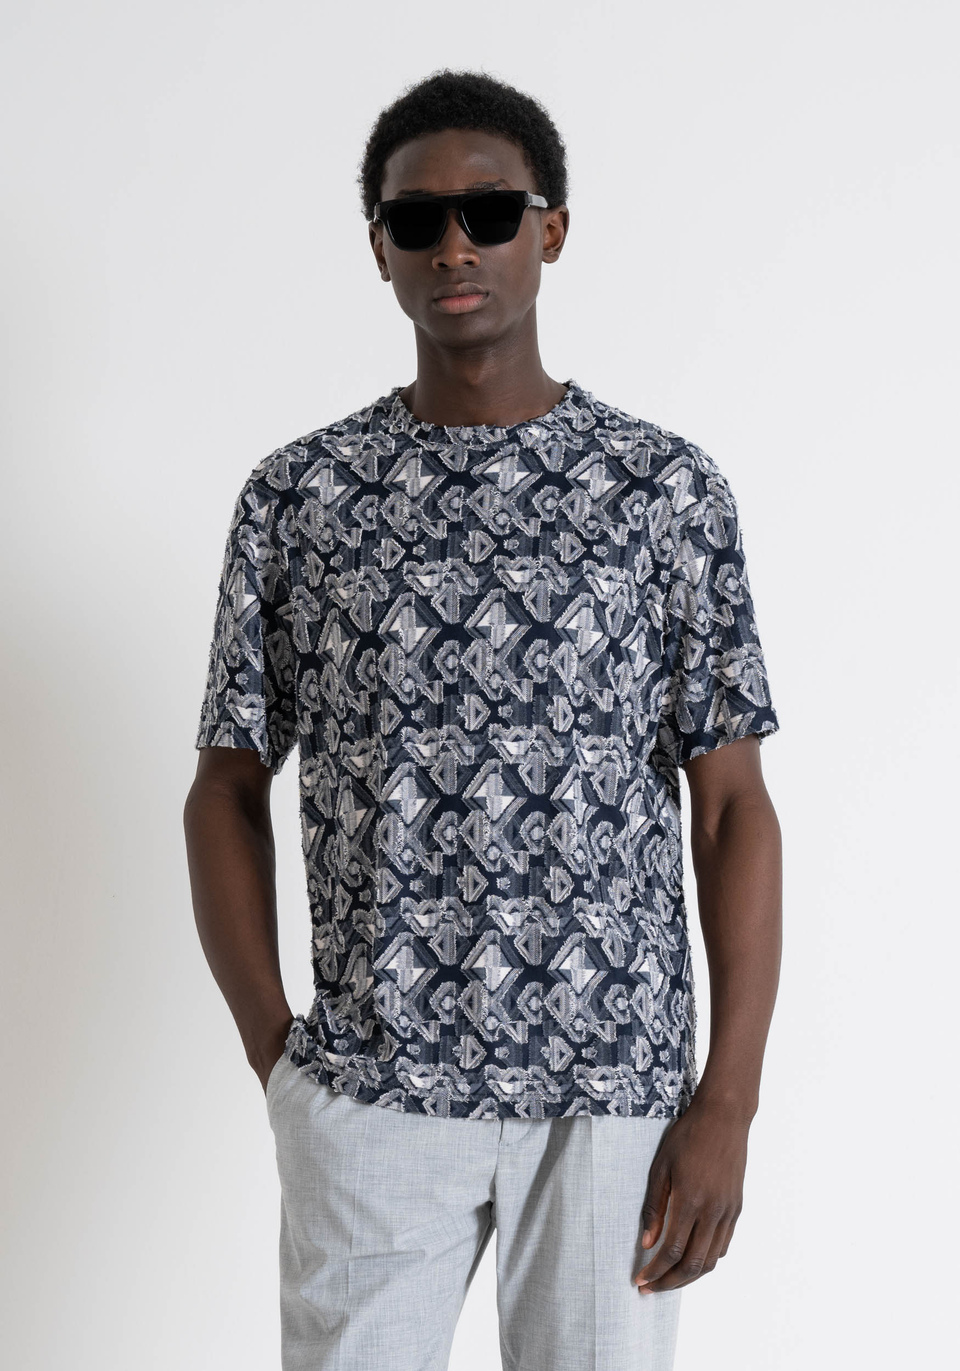 RELAXED FIT T-SHIRT IN JACQUARD VISCOSE BLEND FABRIC - Antony Morato Online Shop